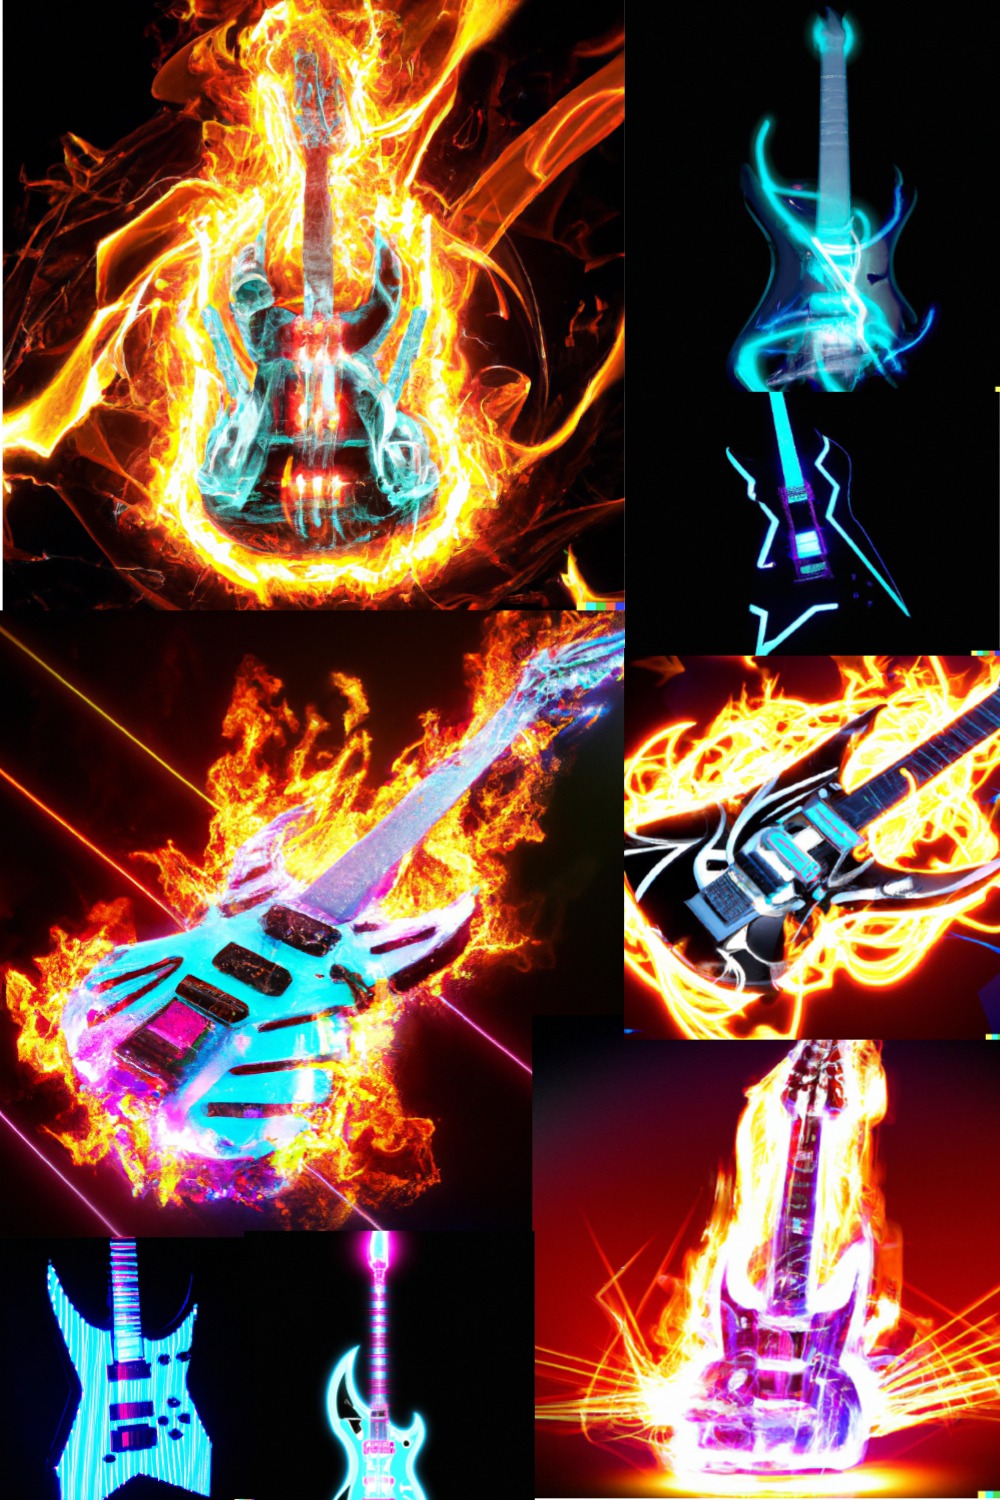 Futuristic neon lit cyborg guitar with flames background pinterest preview image.